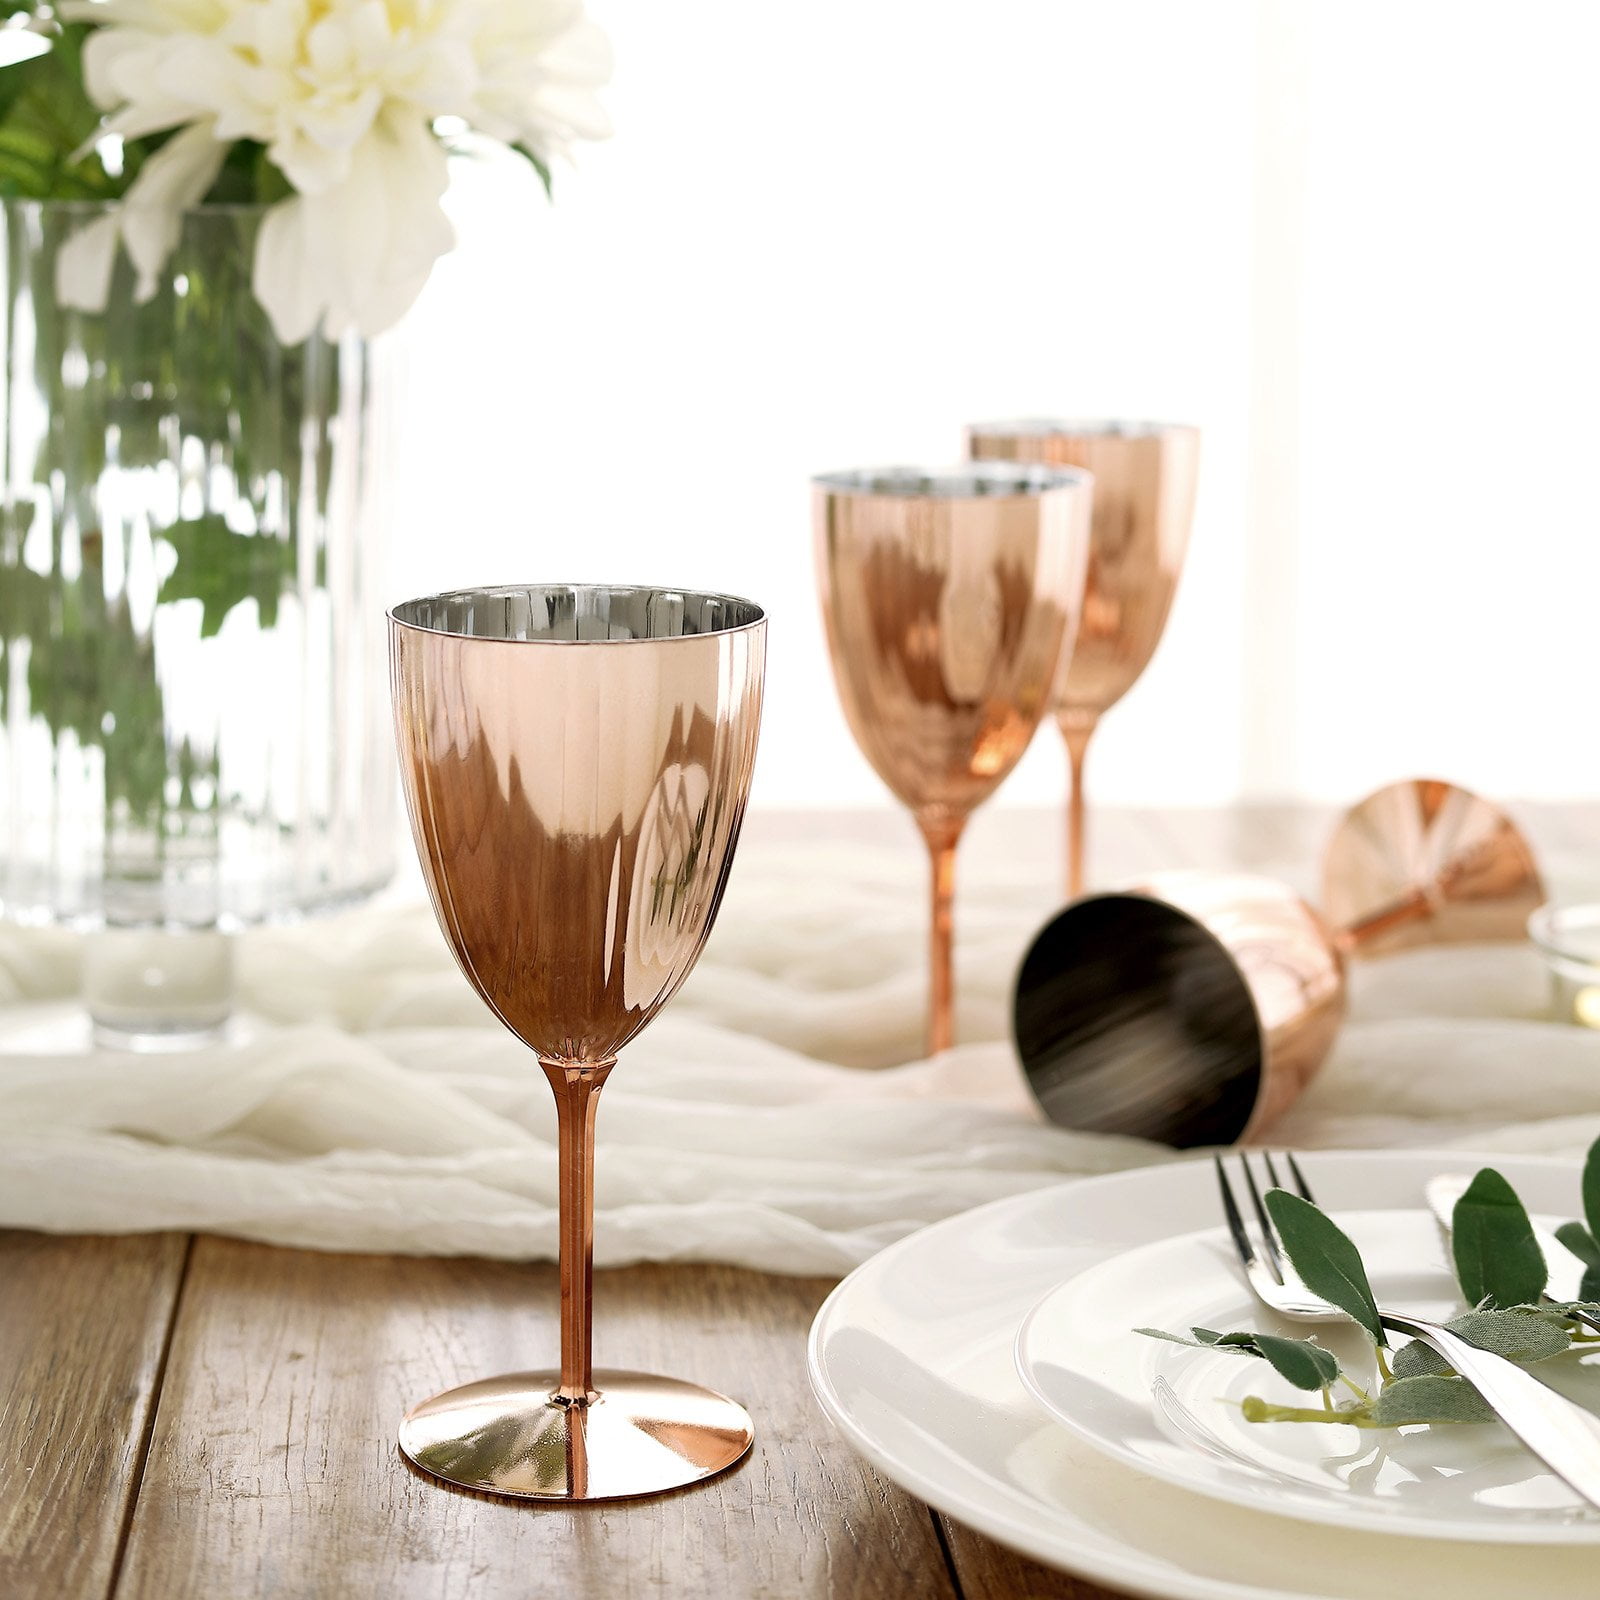 NEW SET OF 4 LUSTER METALLIC ROSE GOLD MIRROR+CLEAR WINE,GOBLET+STEM GLASS 